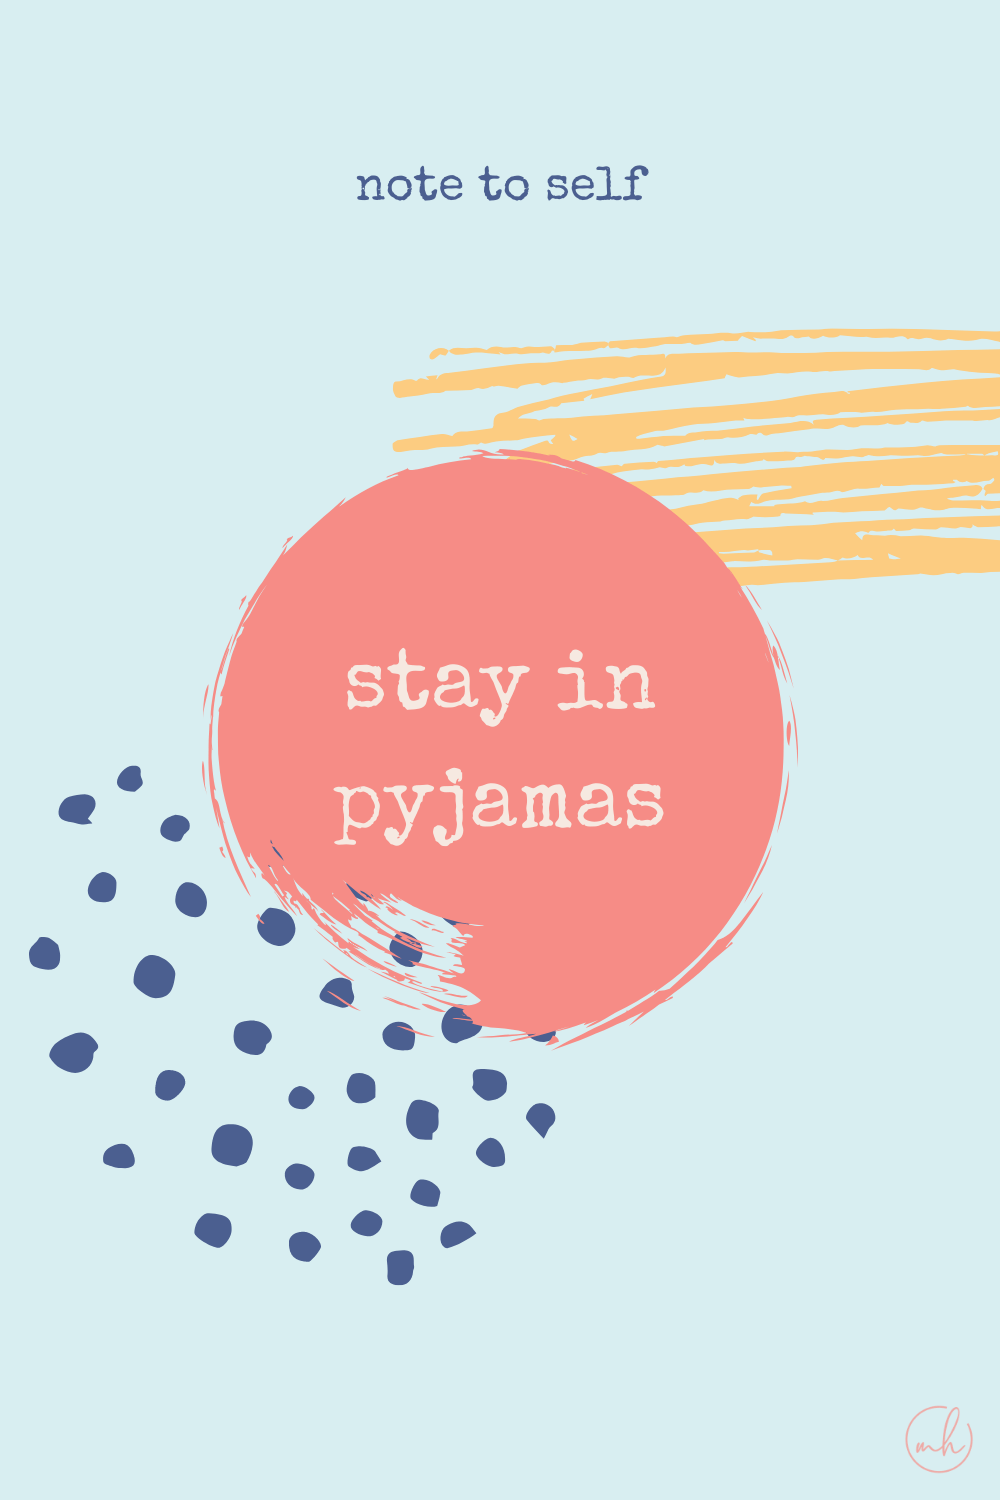 Stay in pyjamas - Note to self quotes | myhoogah